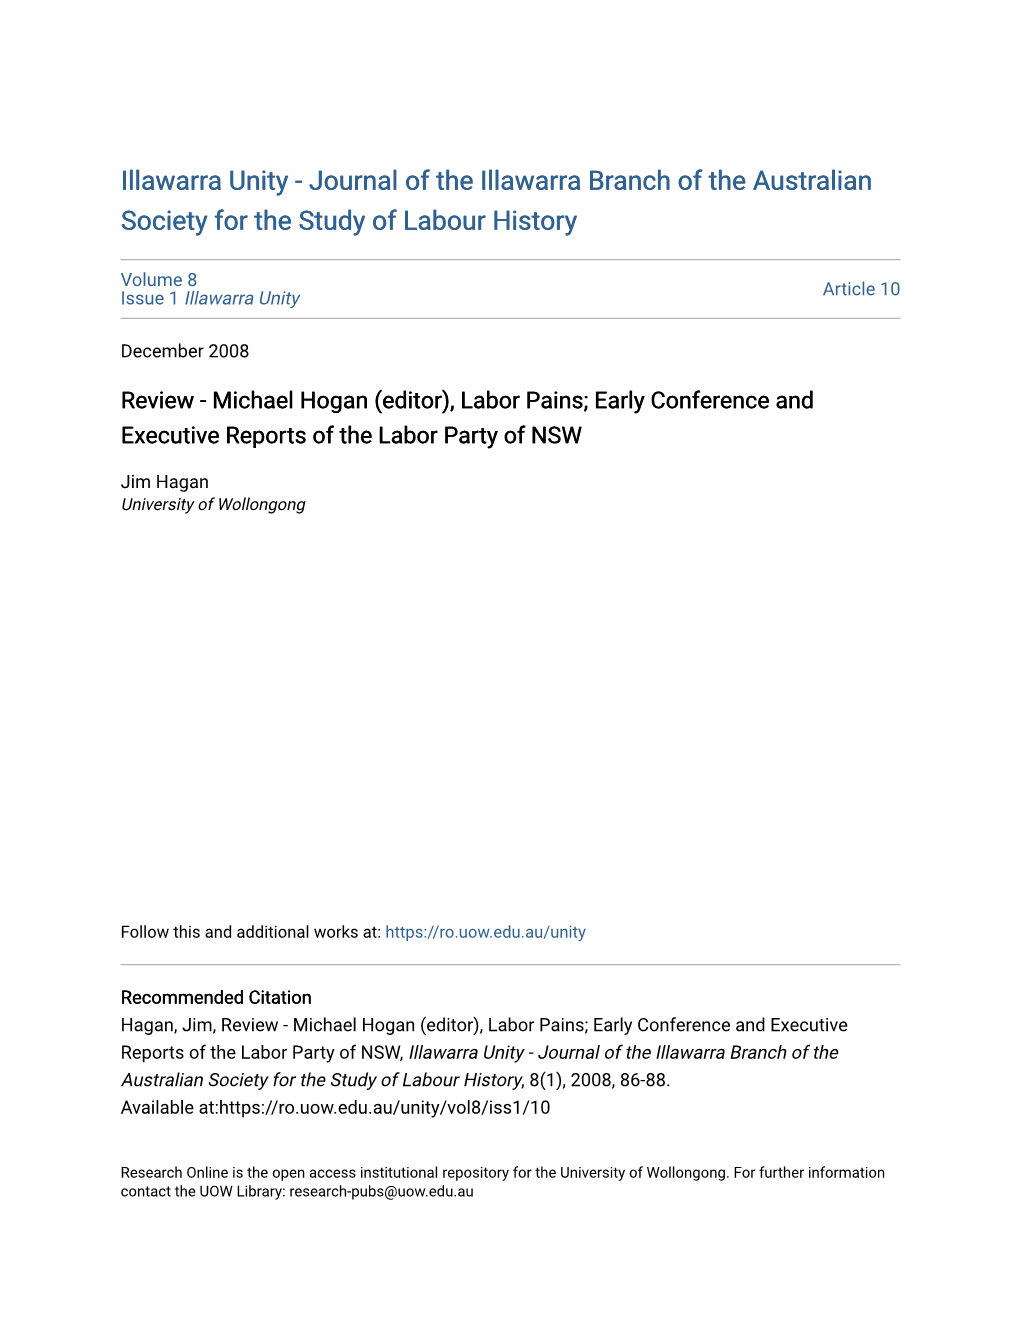 Review - Michael Hogan (Editor), Labor Pains; Early Conference and Executive Reports of the Labor Party of NSW